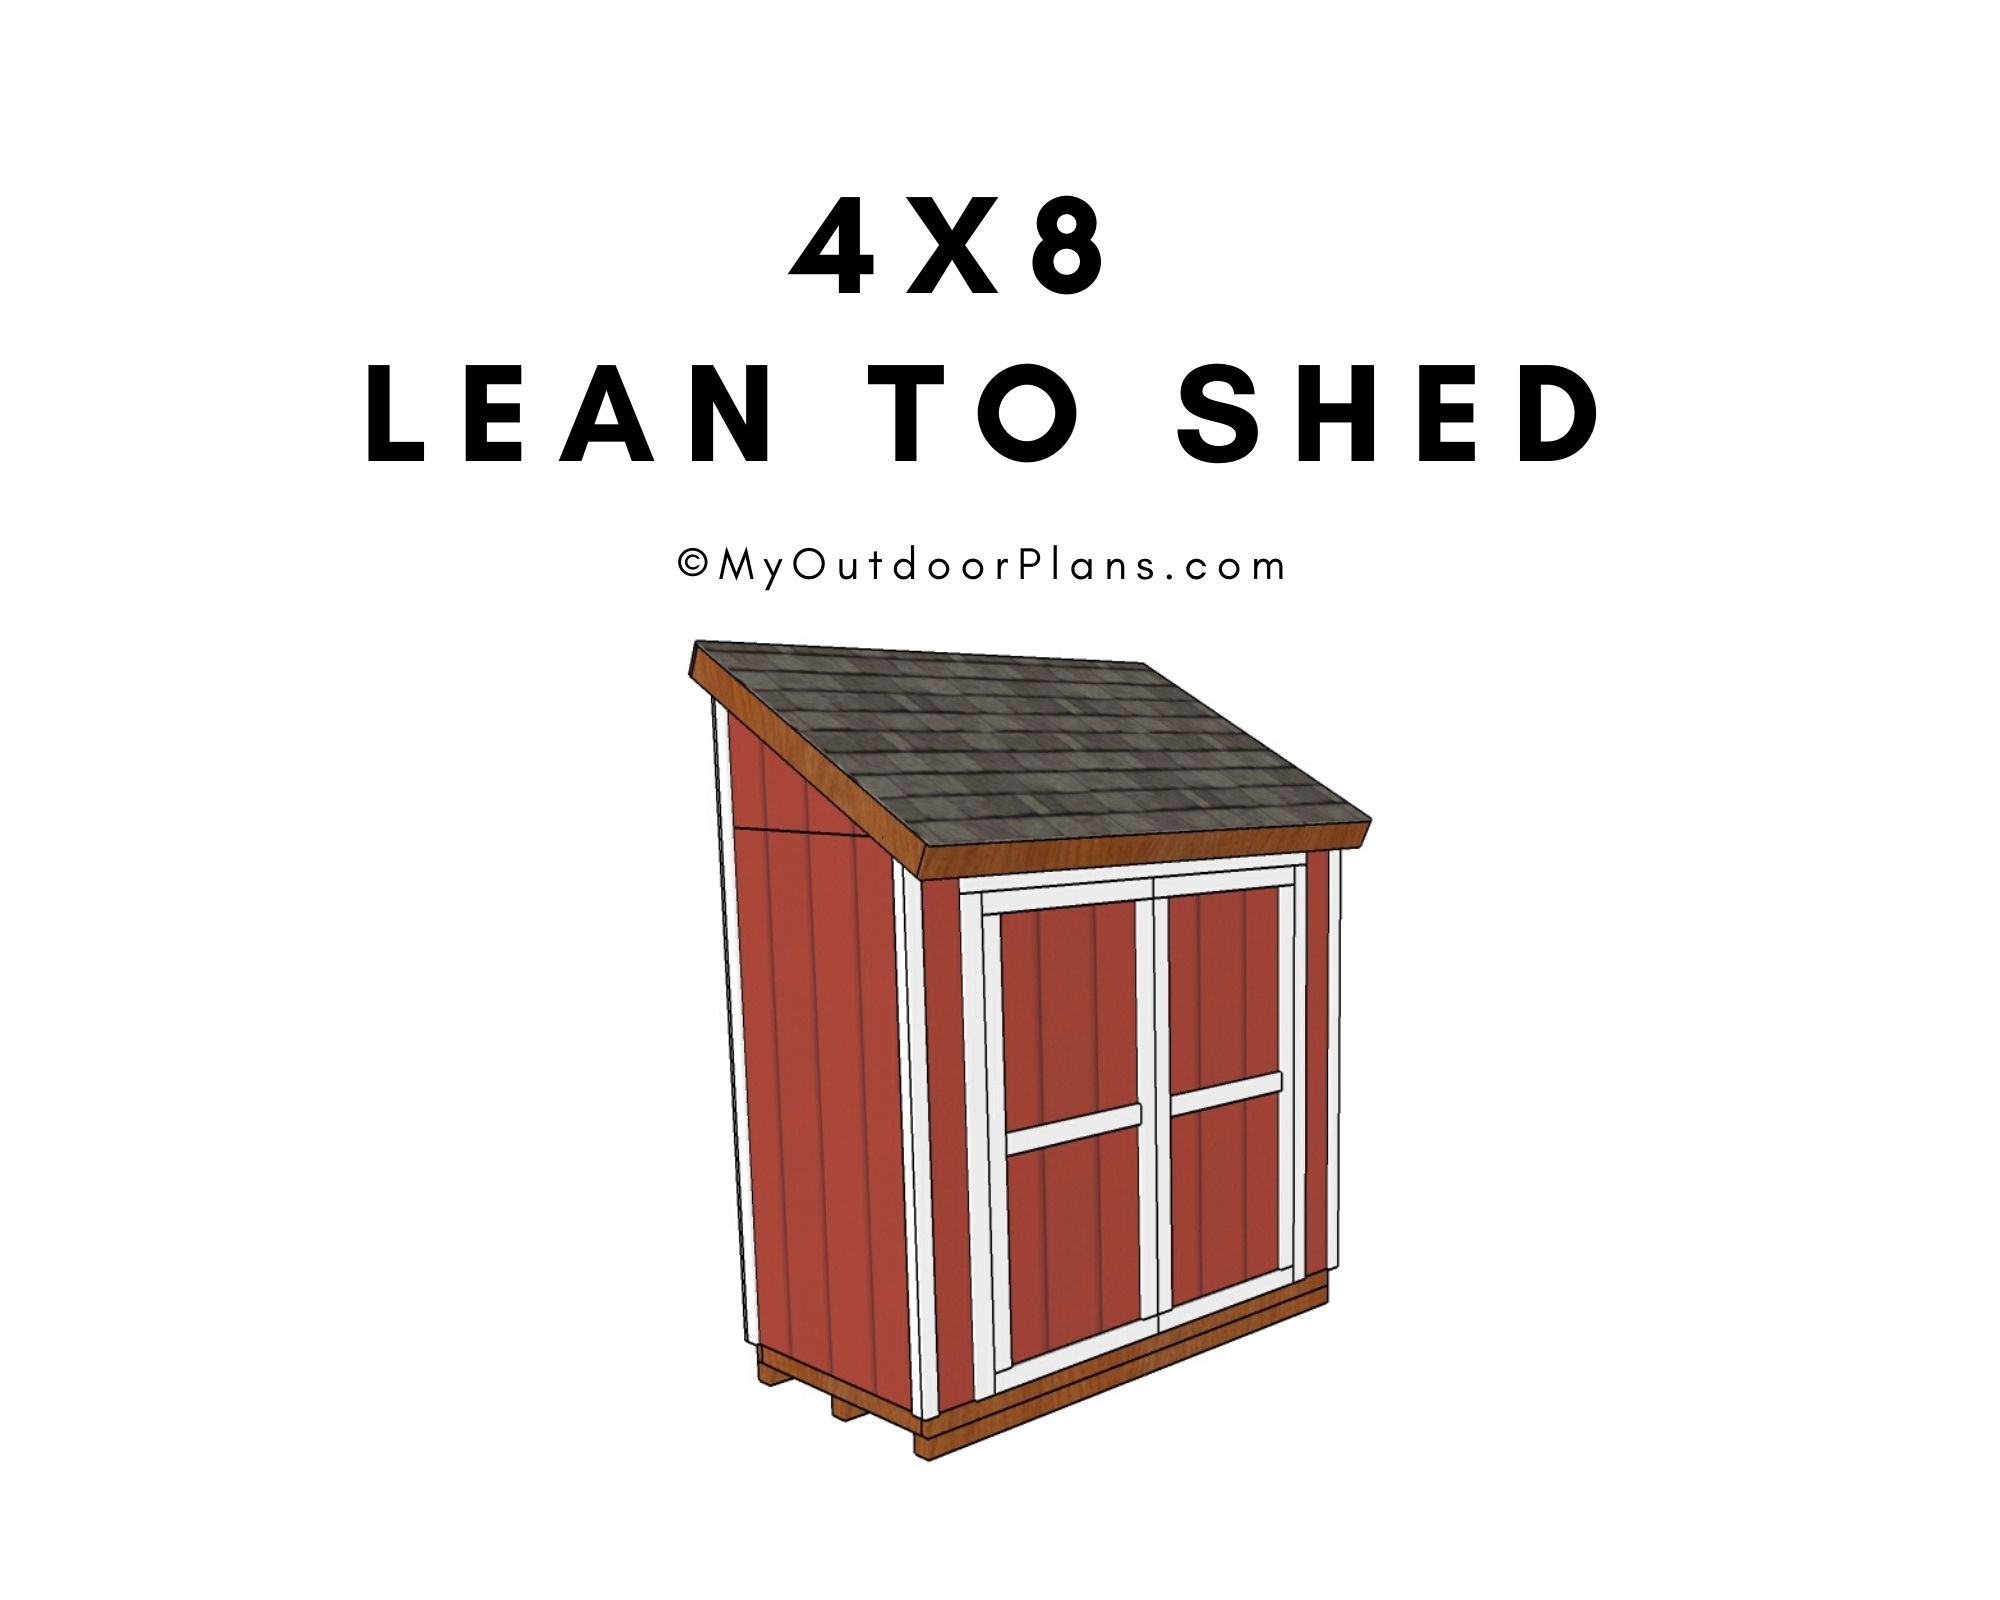 12x12 shed plans myoutdoorplans free woodworking plans